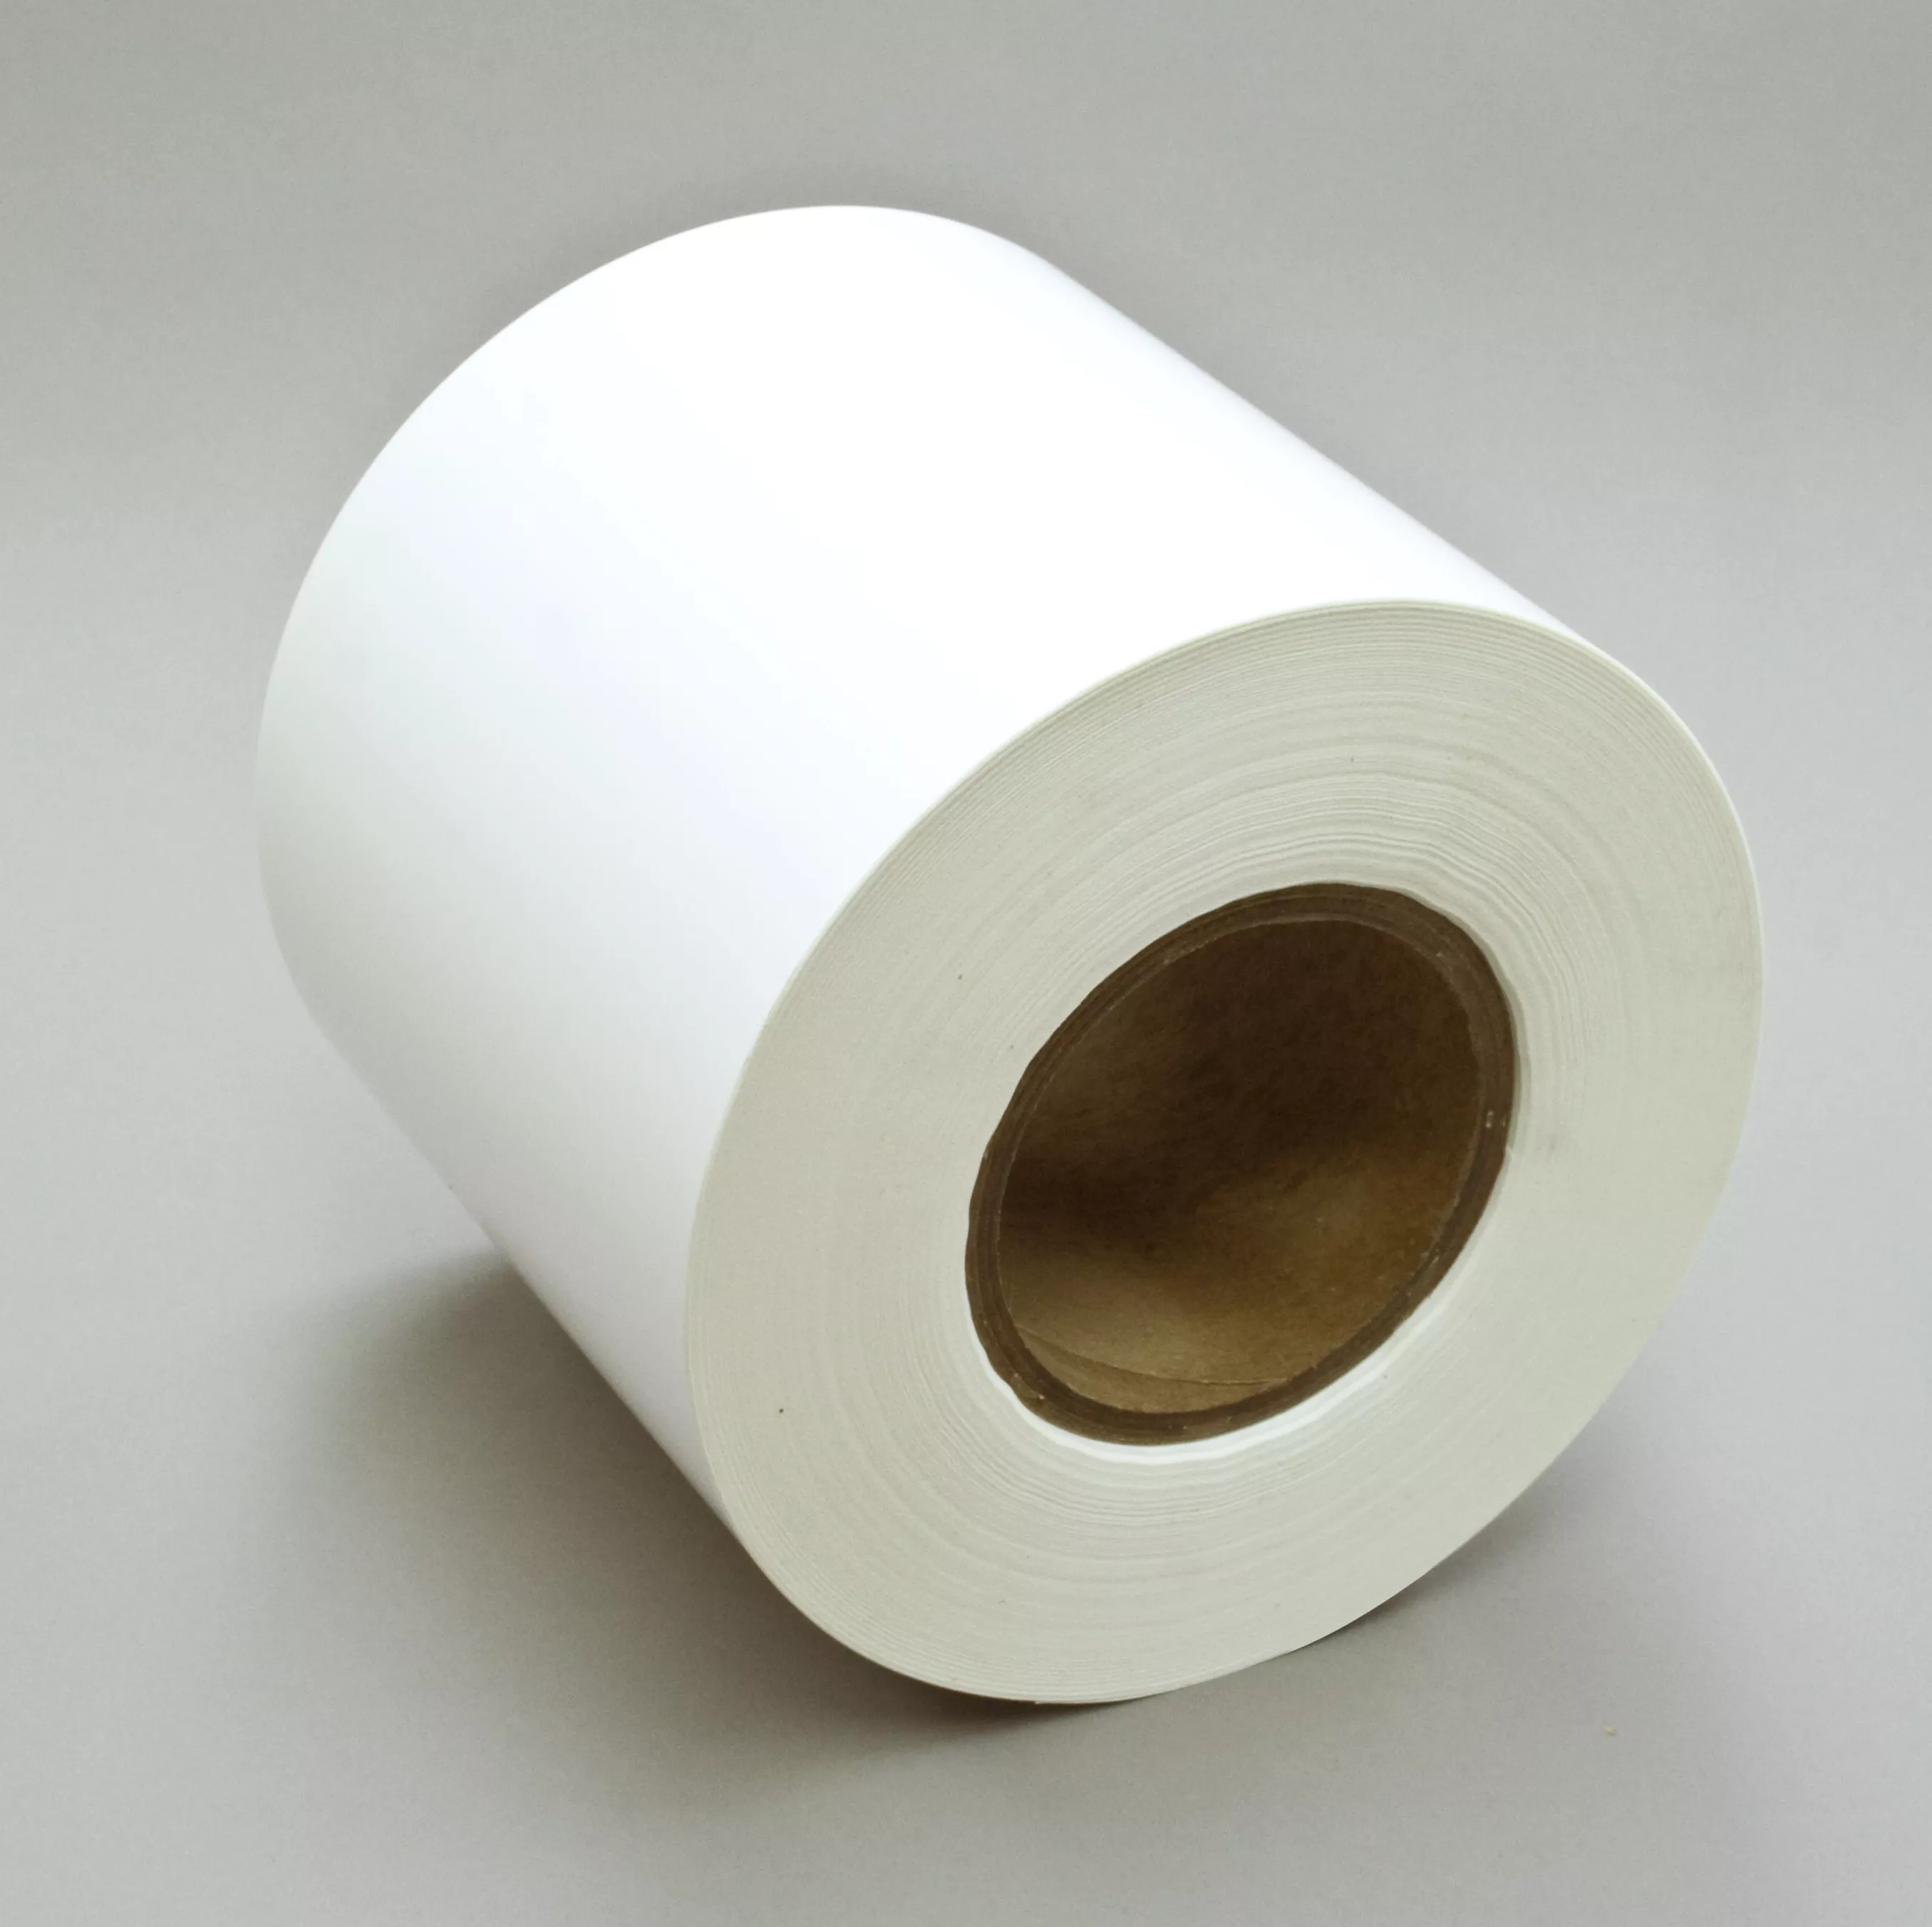 3M™ Thermal Transfer Label Material 7810, White Polyester Matte, 6 in x
1668 ft, 1 Roll/Case